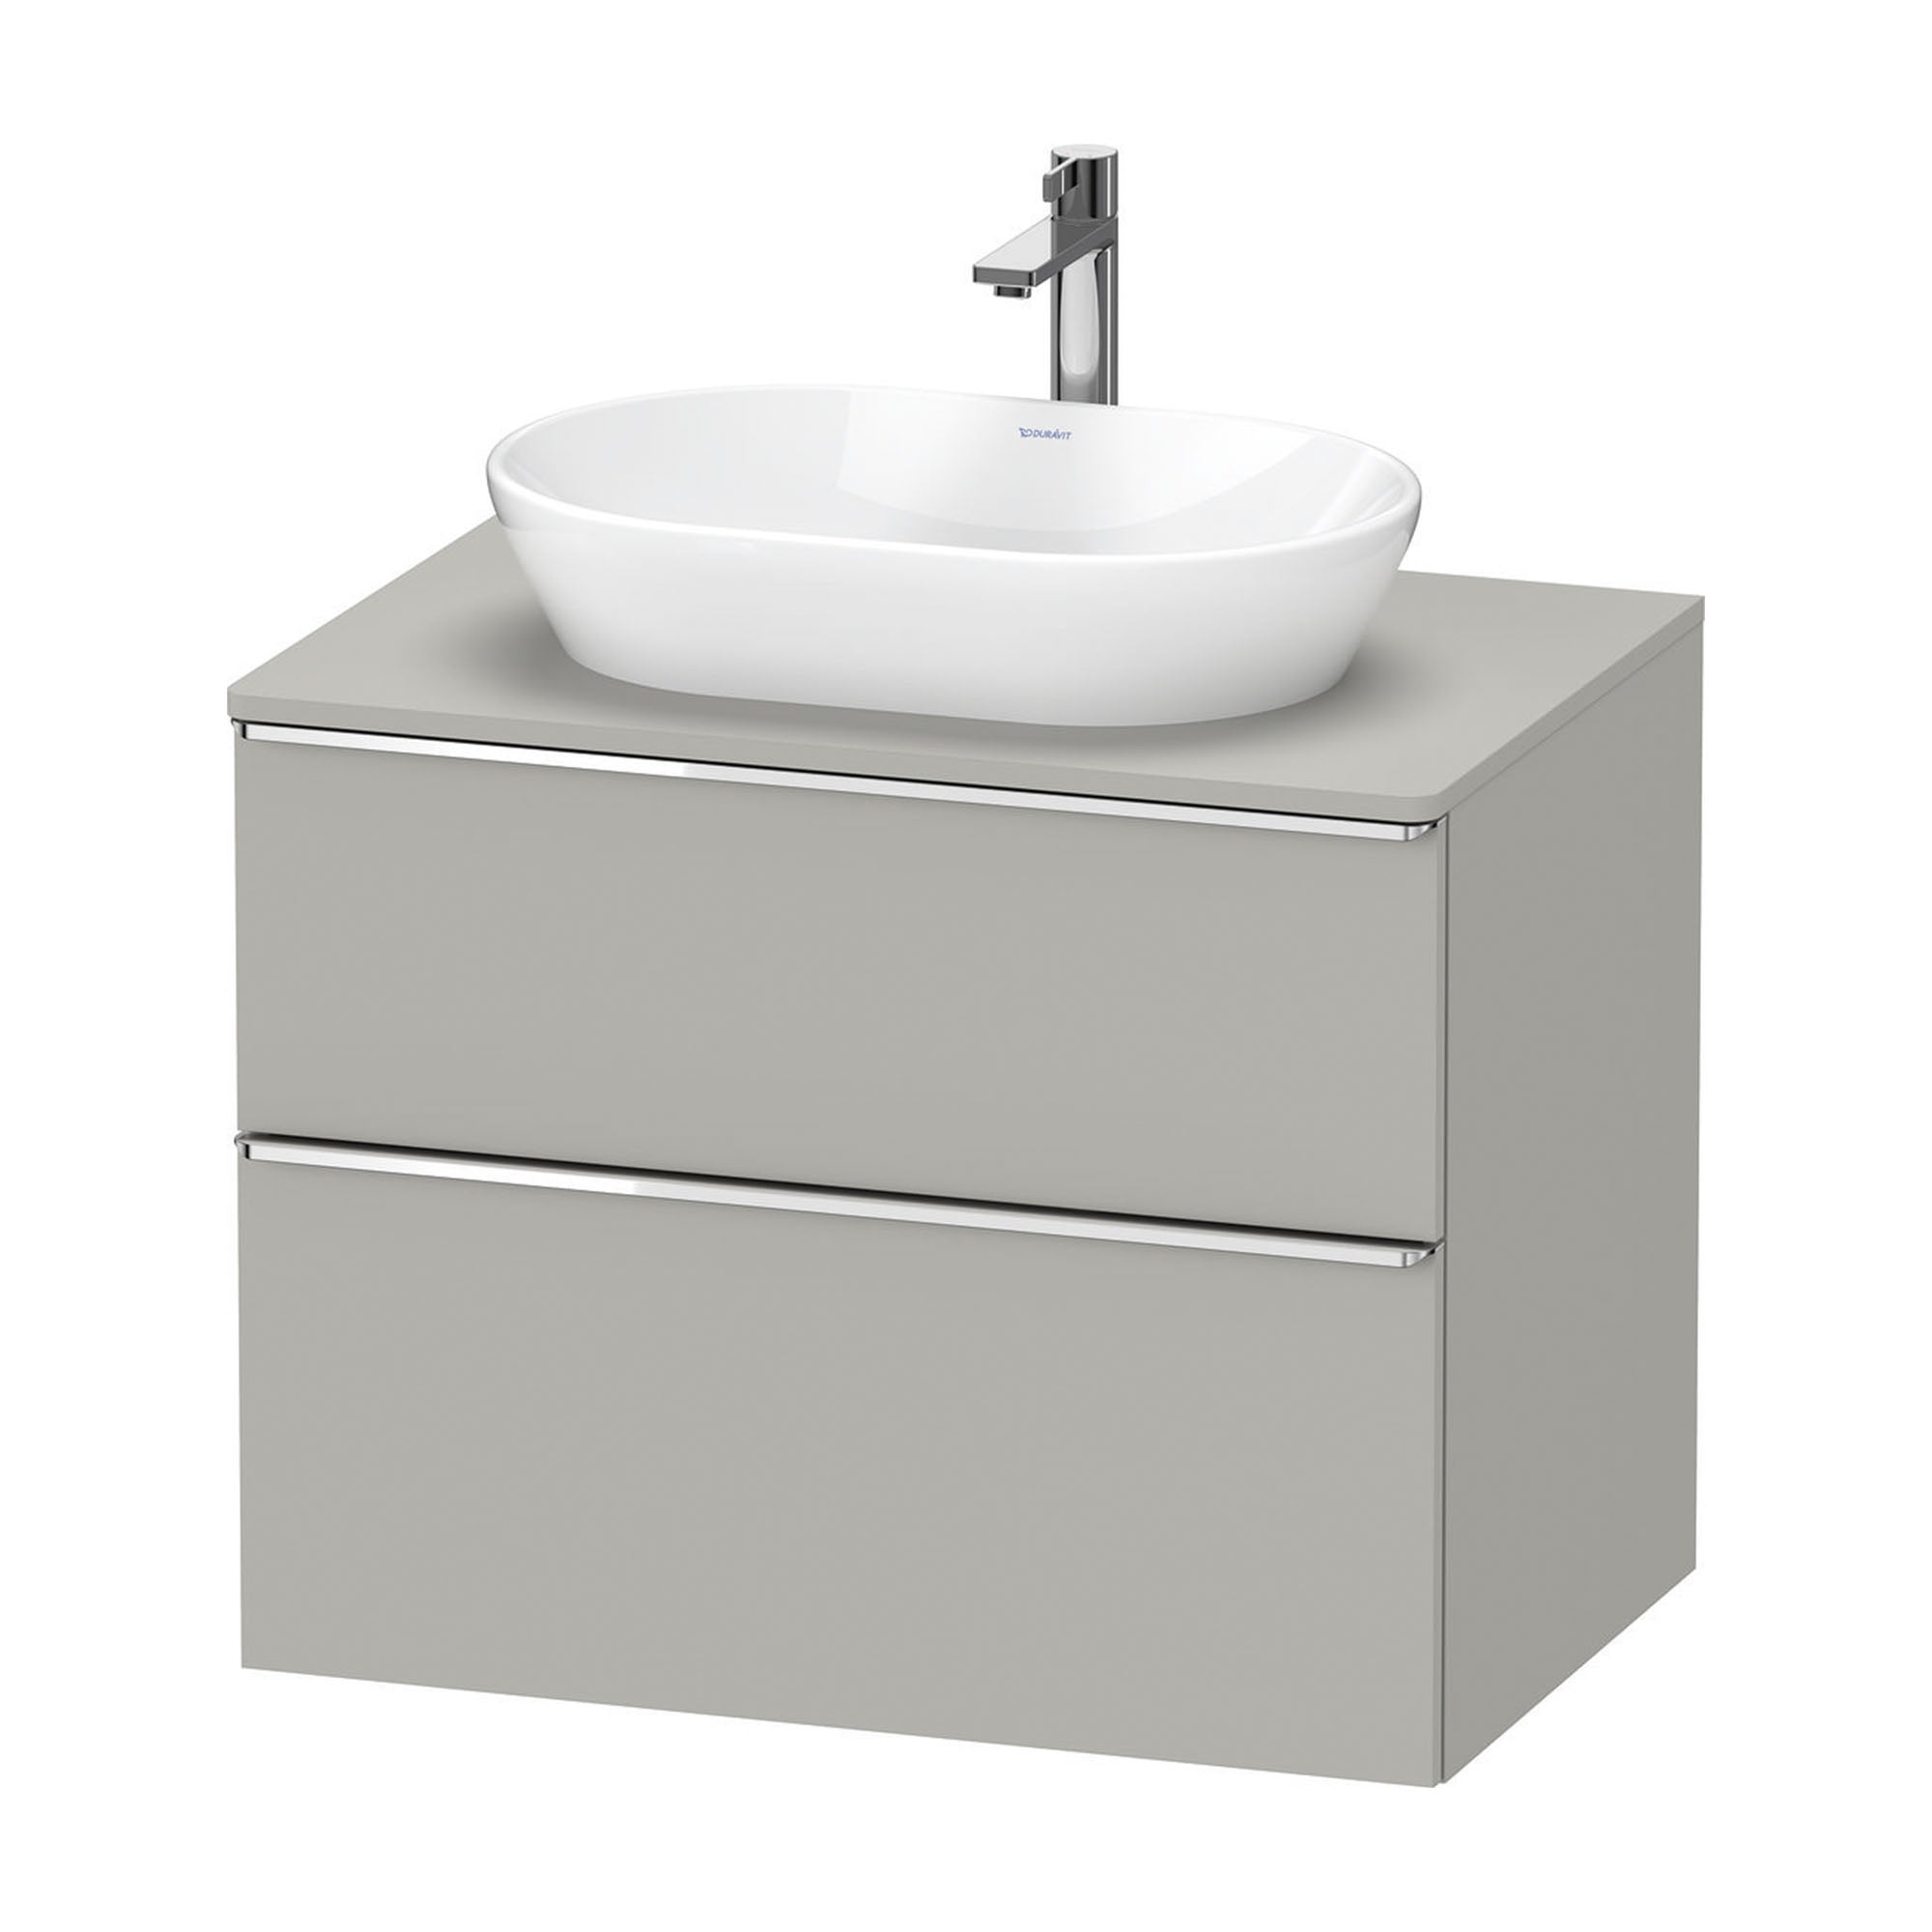 duravit d-neo 800 wall mounted vanity unit with worktop concrete grey chrome handles